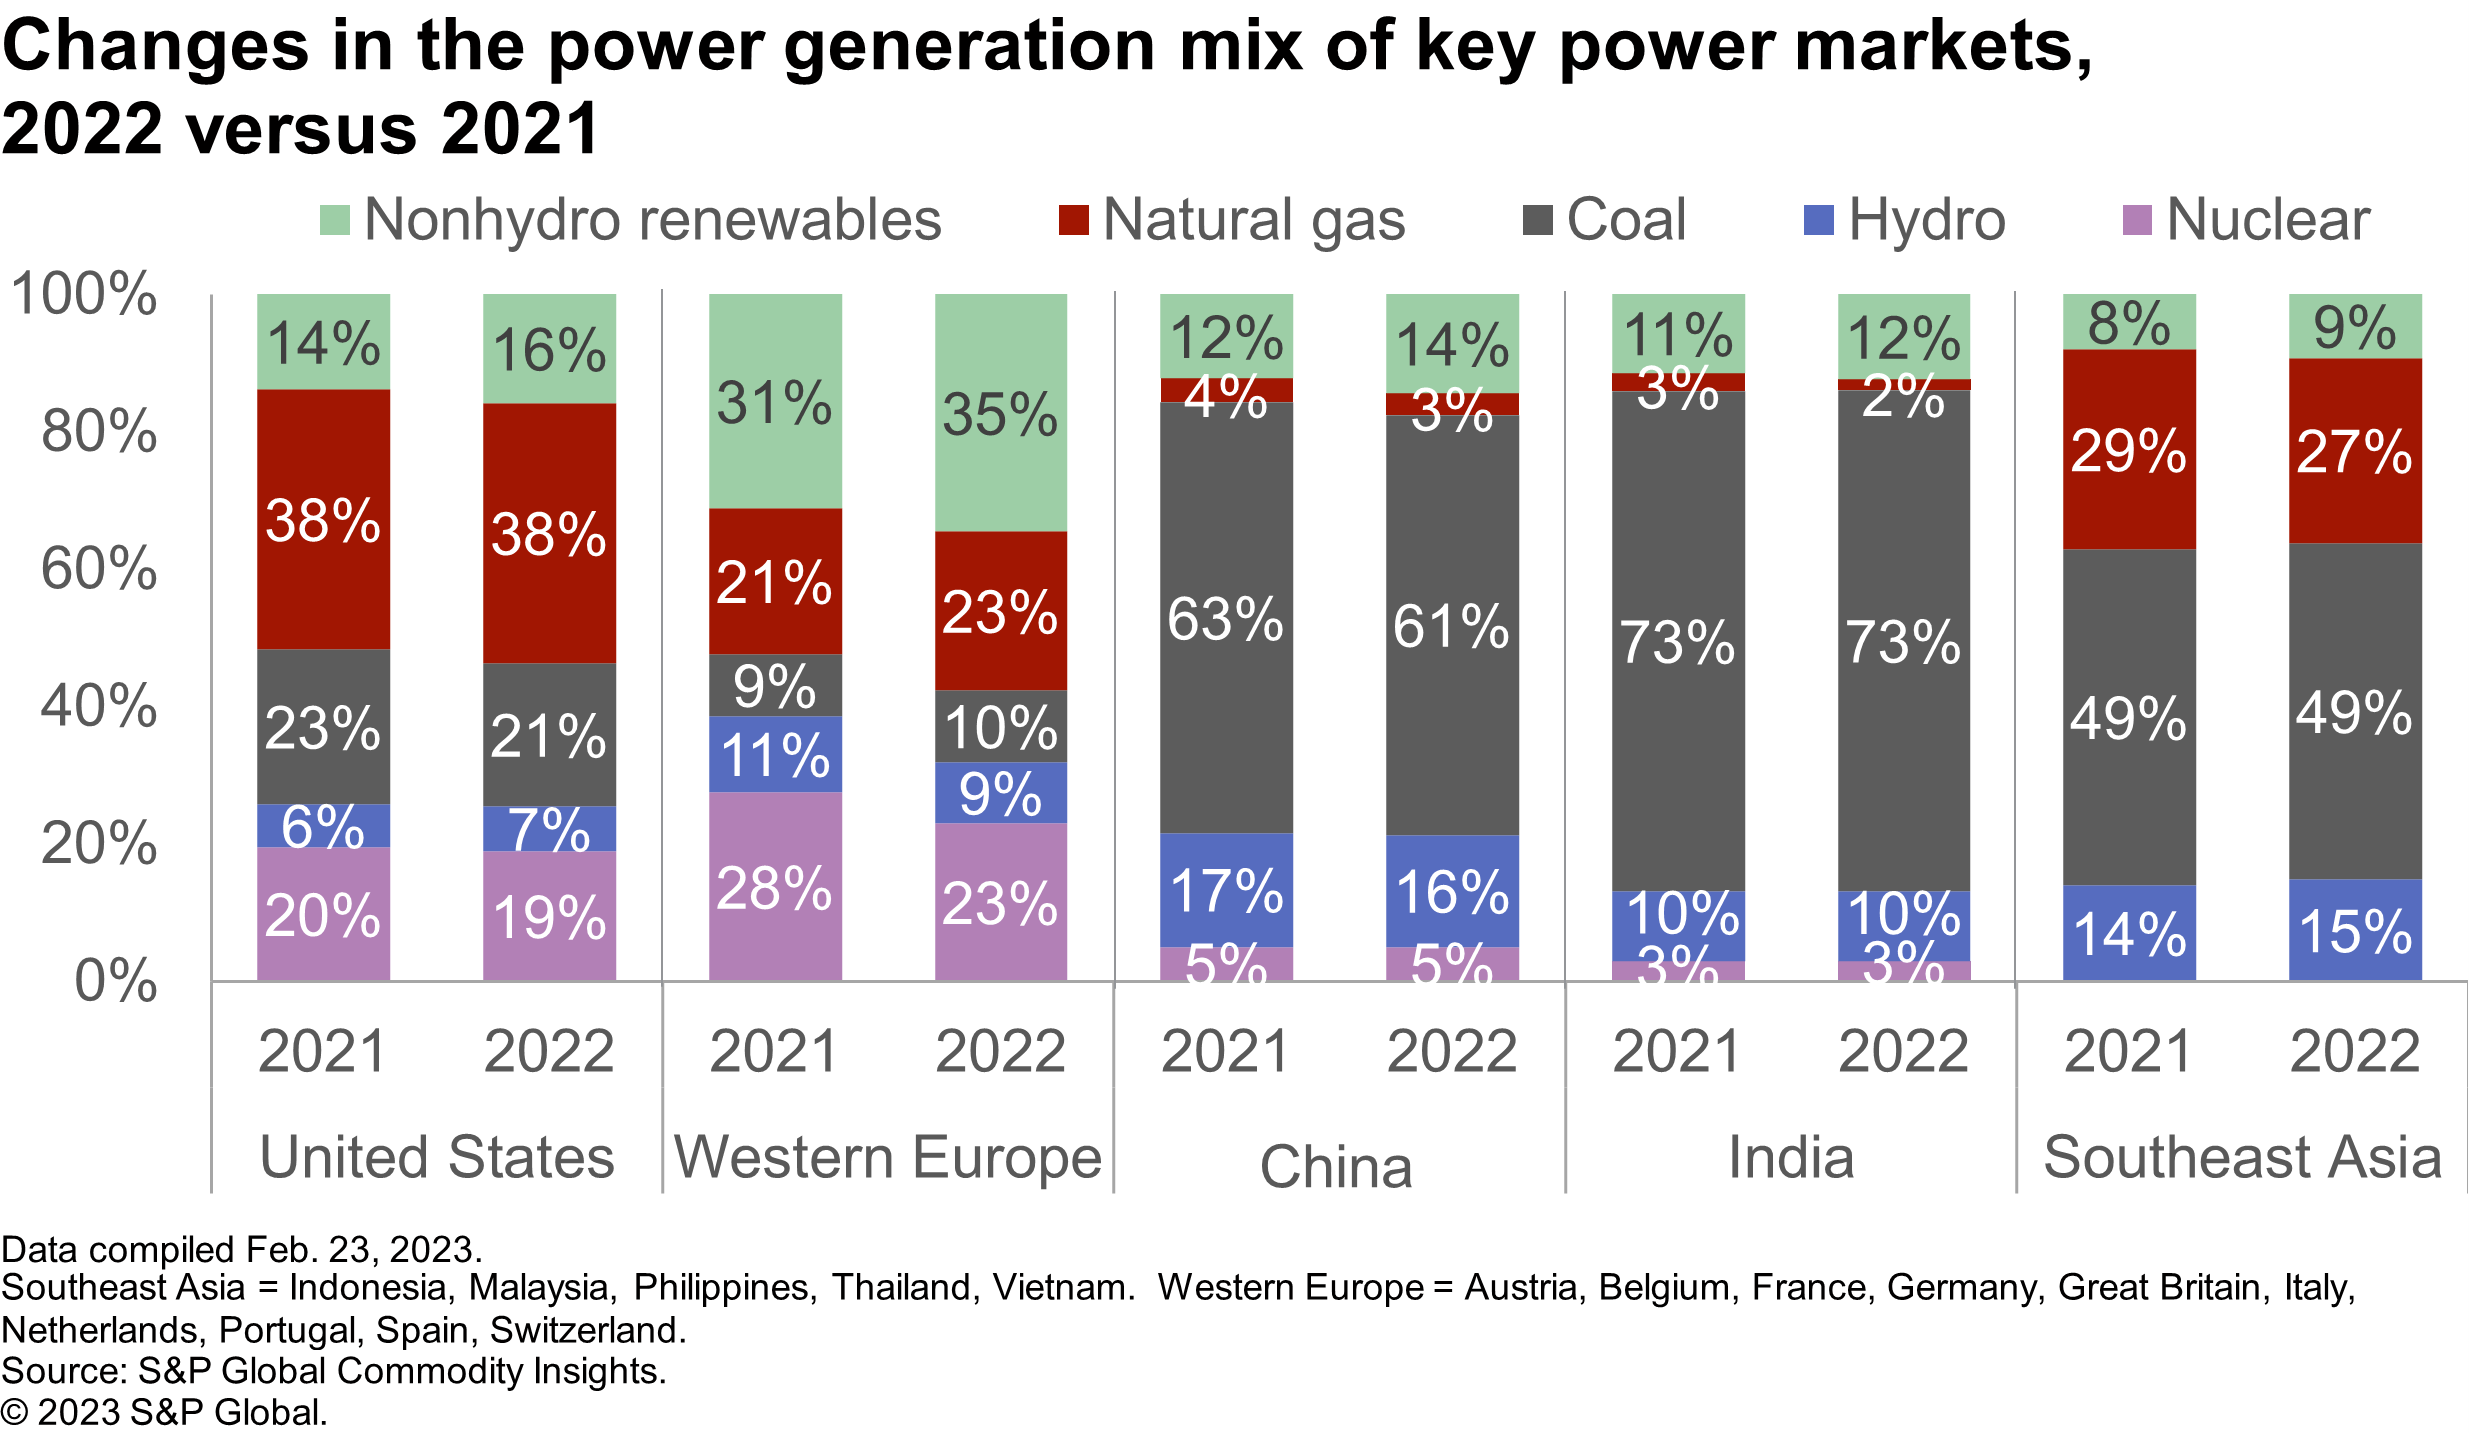 Changes in the power generation mix of key power markets, 2022 vs 2021